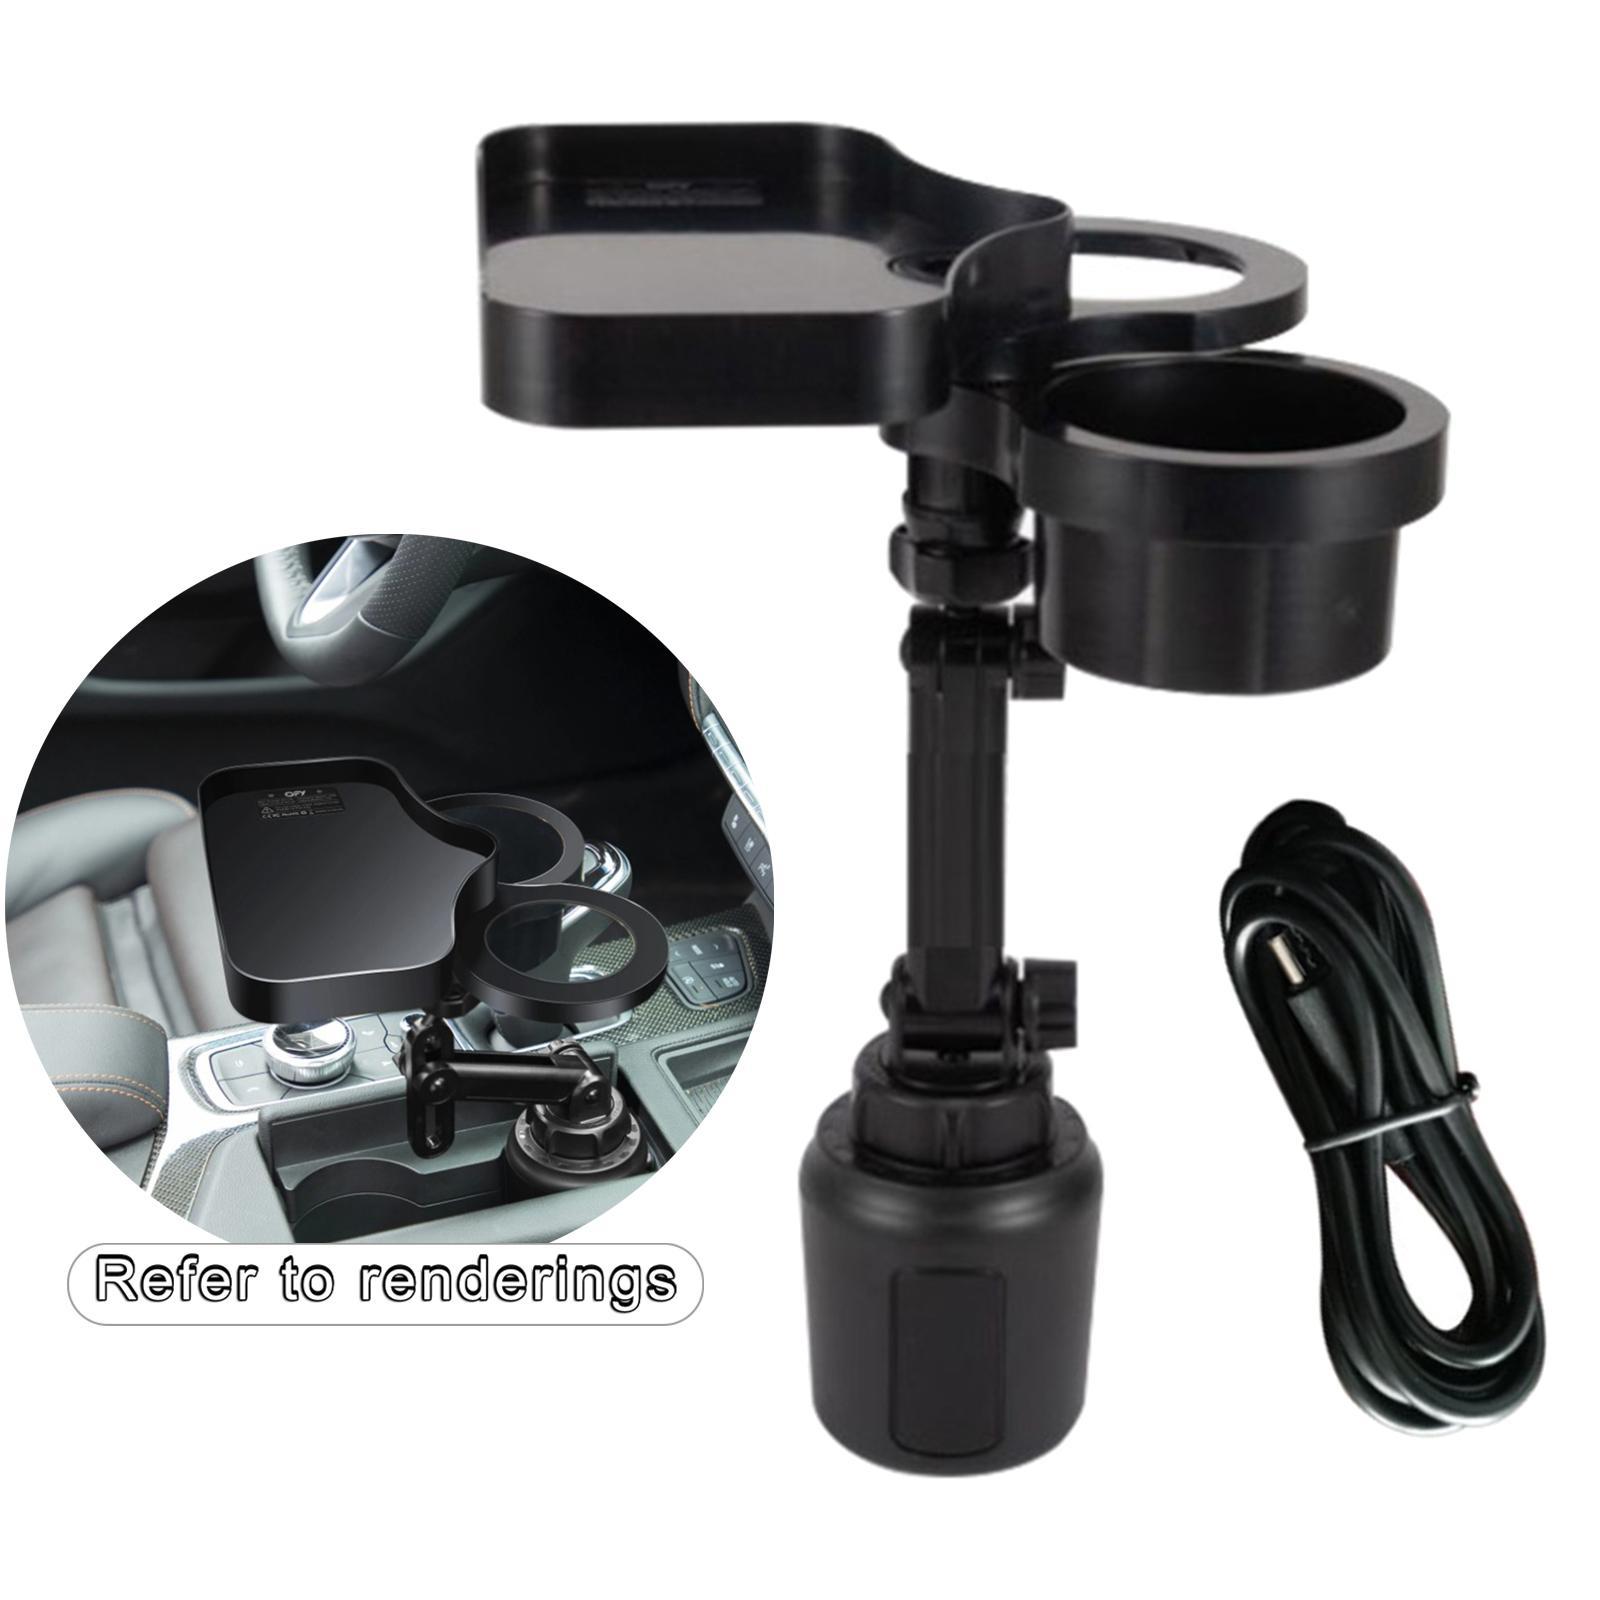 Cup Holder Expander Adapter Stand Rack Rotating base Phone